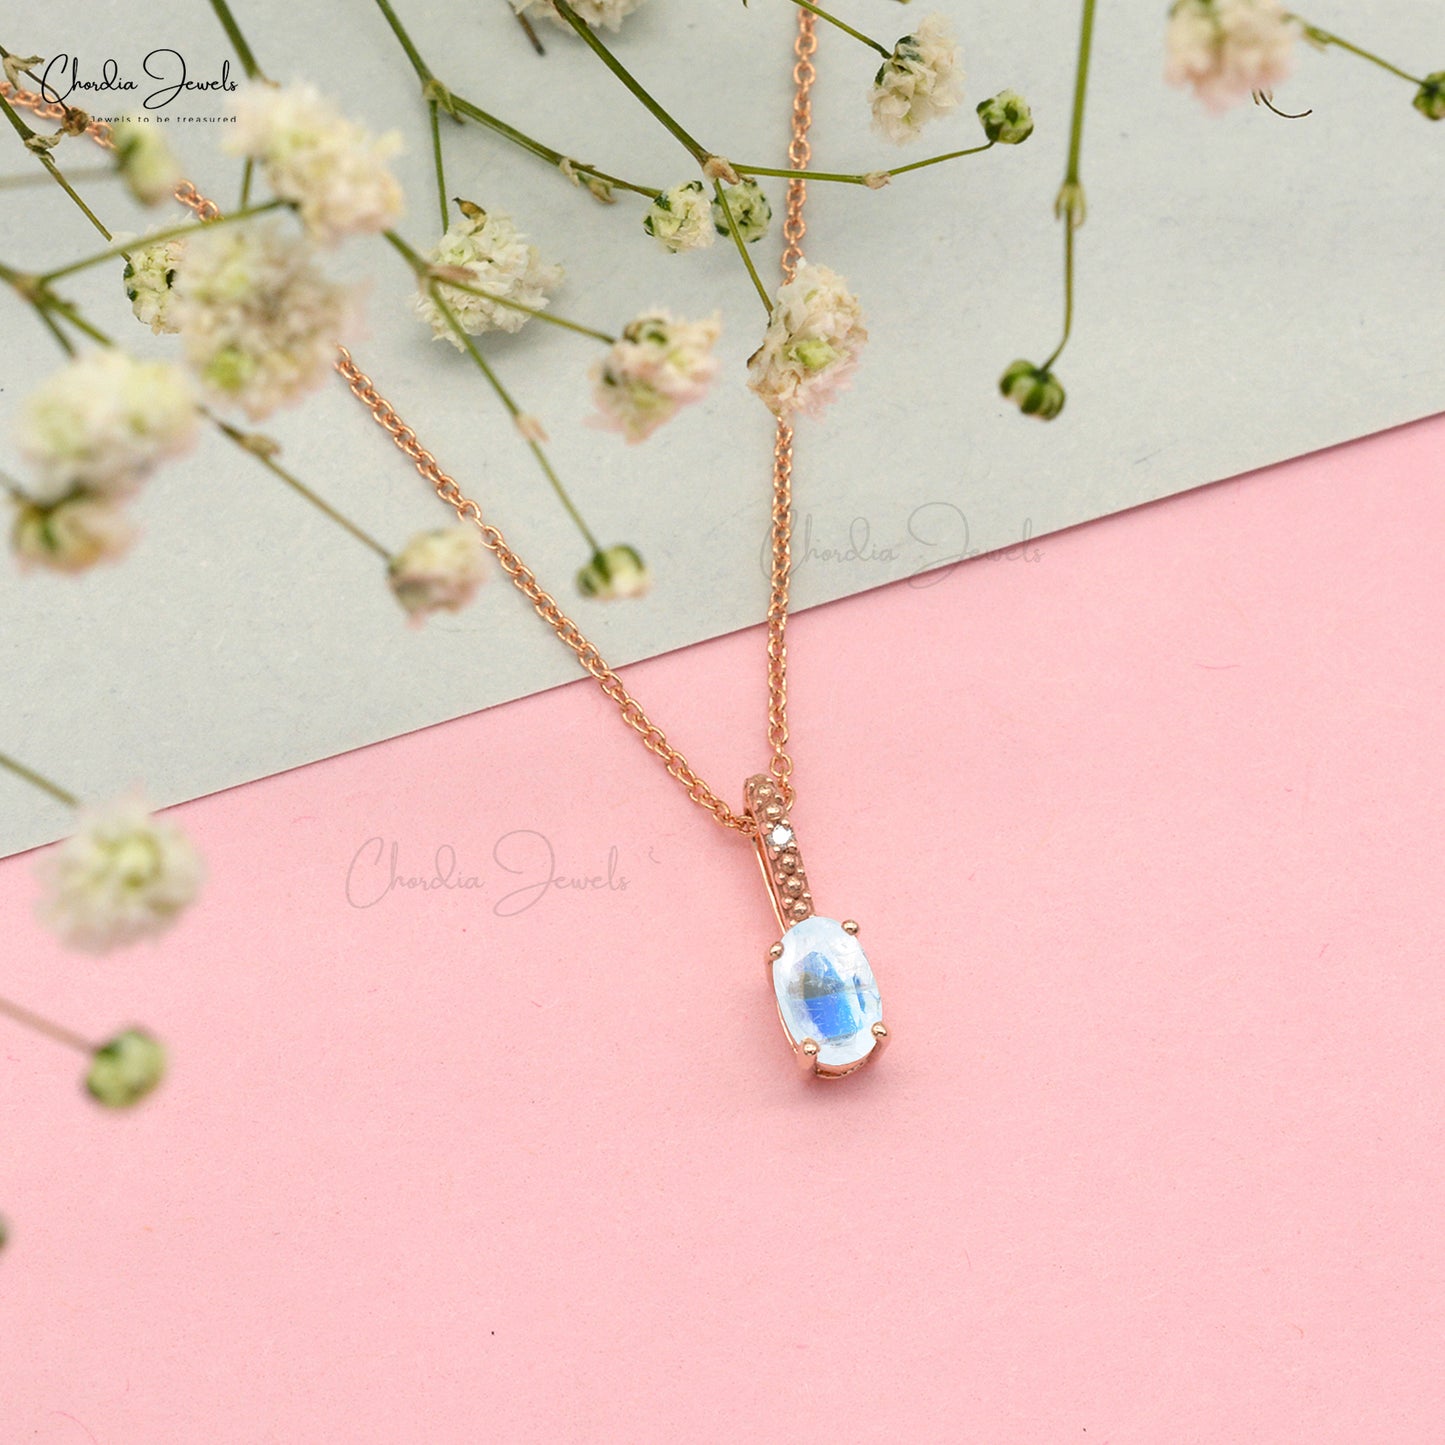 Beautiful Hidden Bail Pendant Necklace Studded White Diamond Authentic Rainbow Moonstone Pendant in Pure 14k Rose Gold Mother's Day Gift